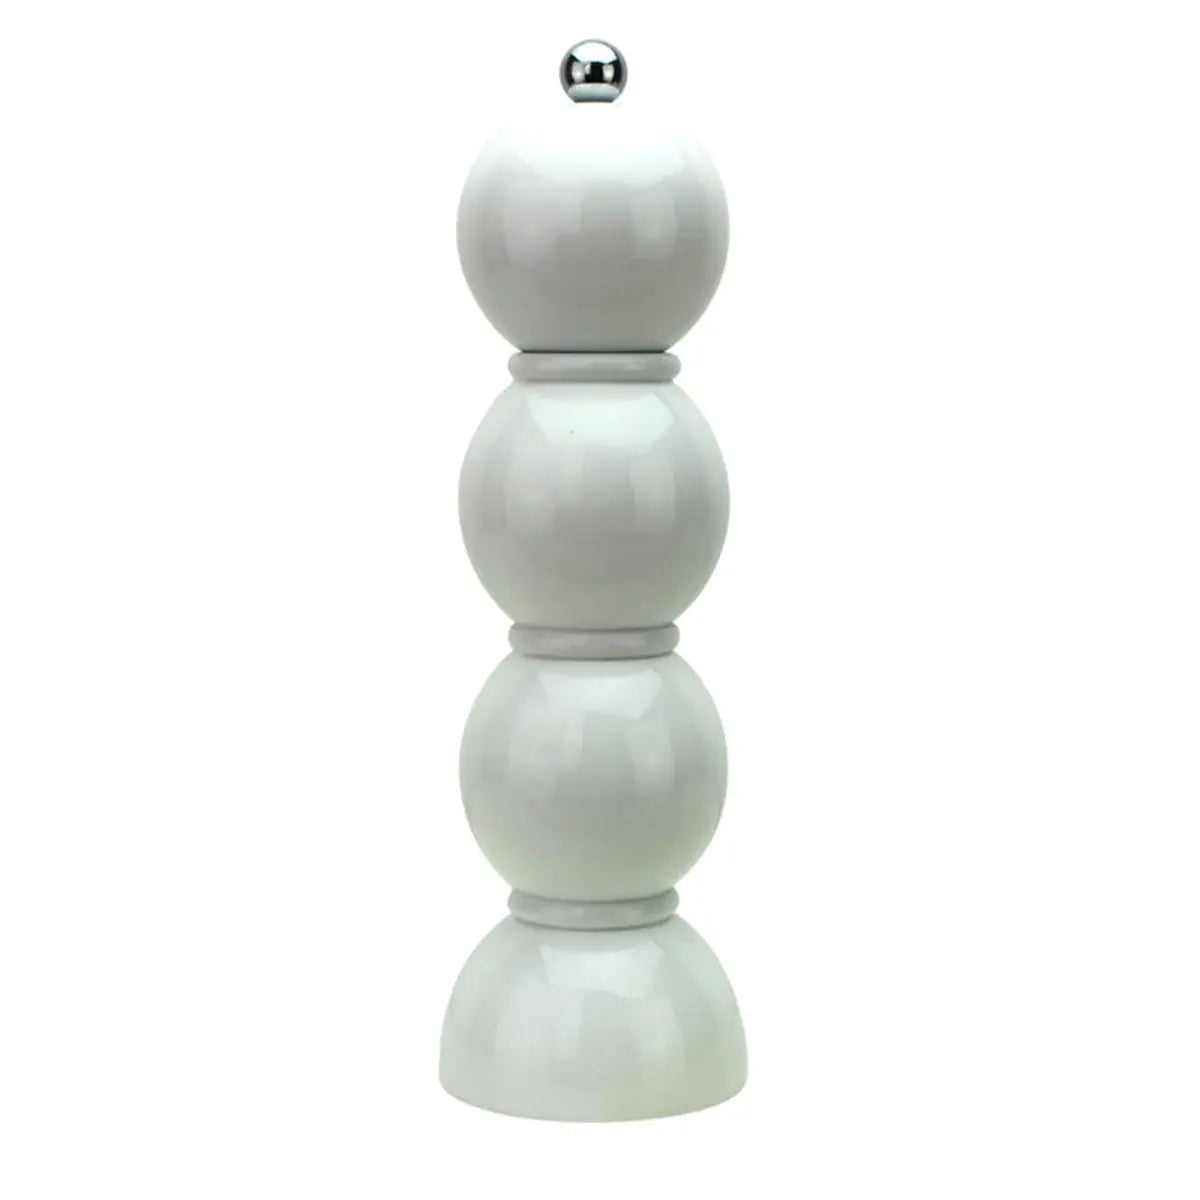 Addison Ross Salt and Pepper Grinders in White